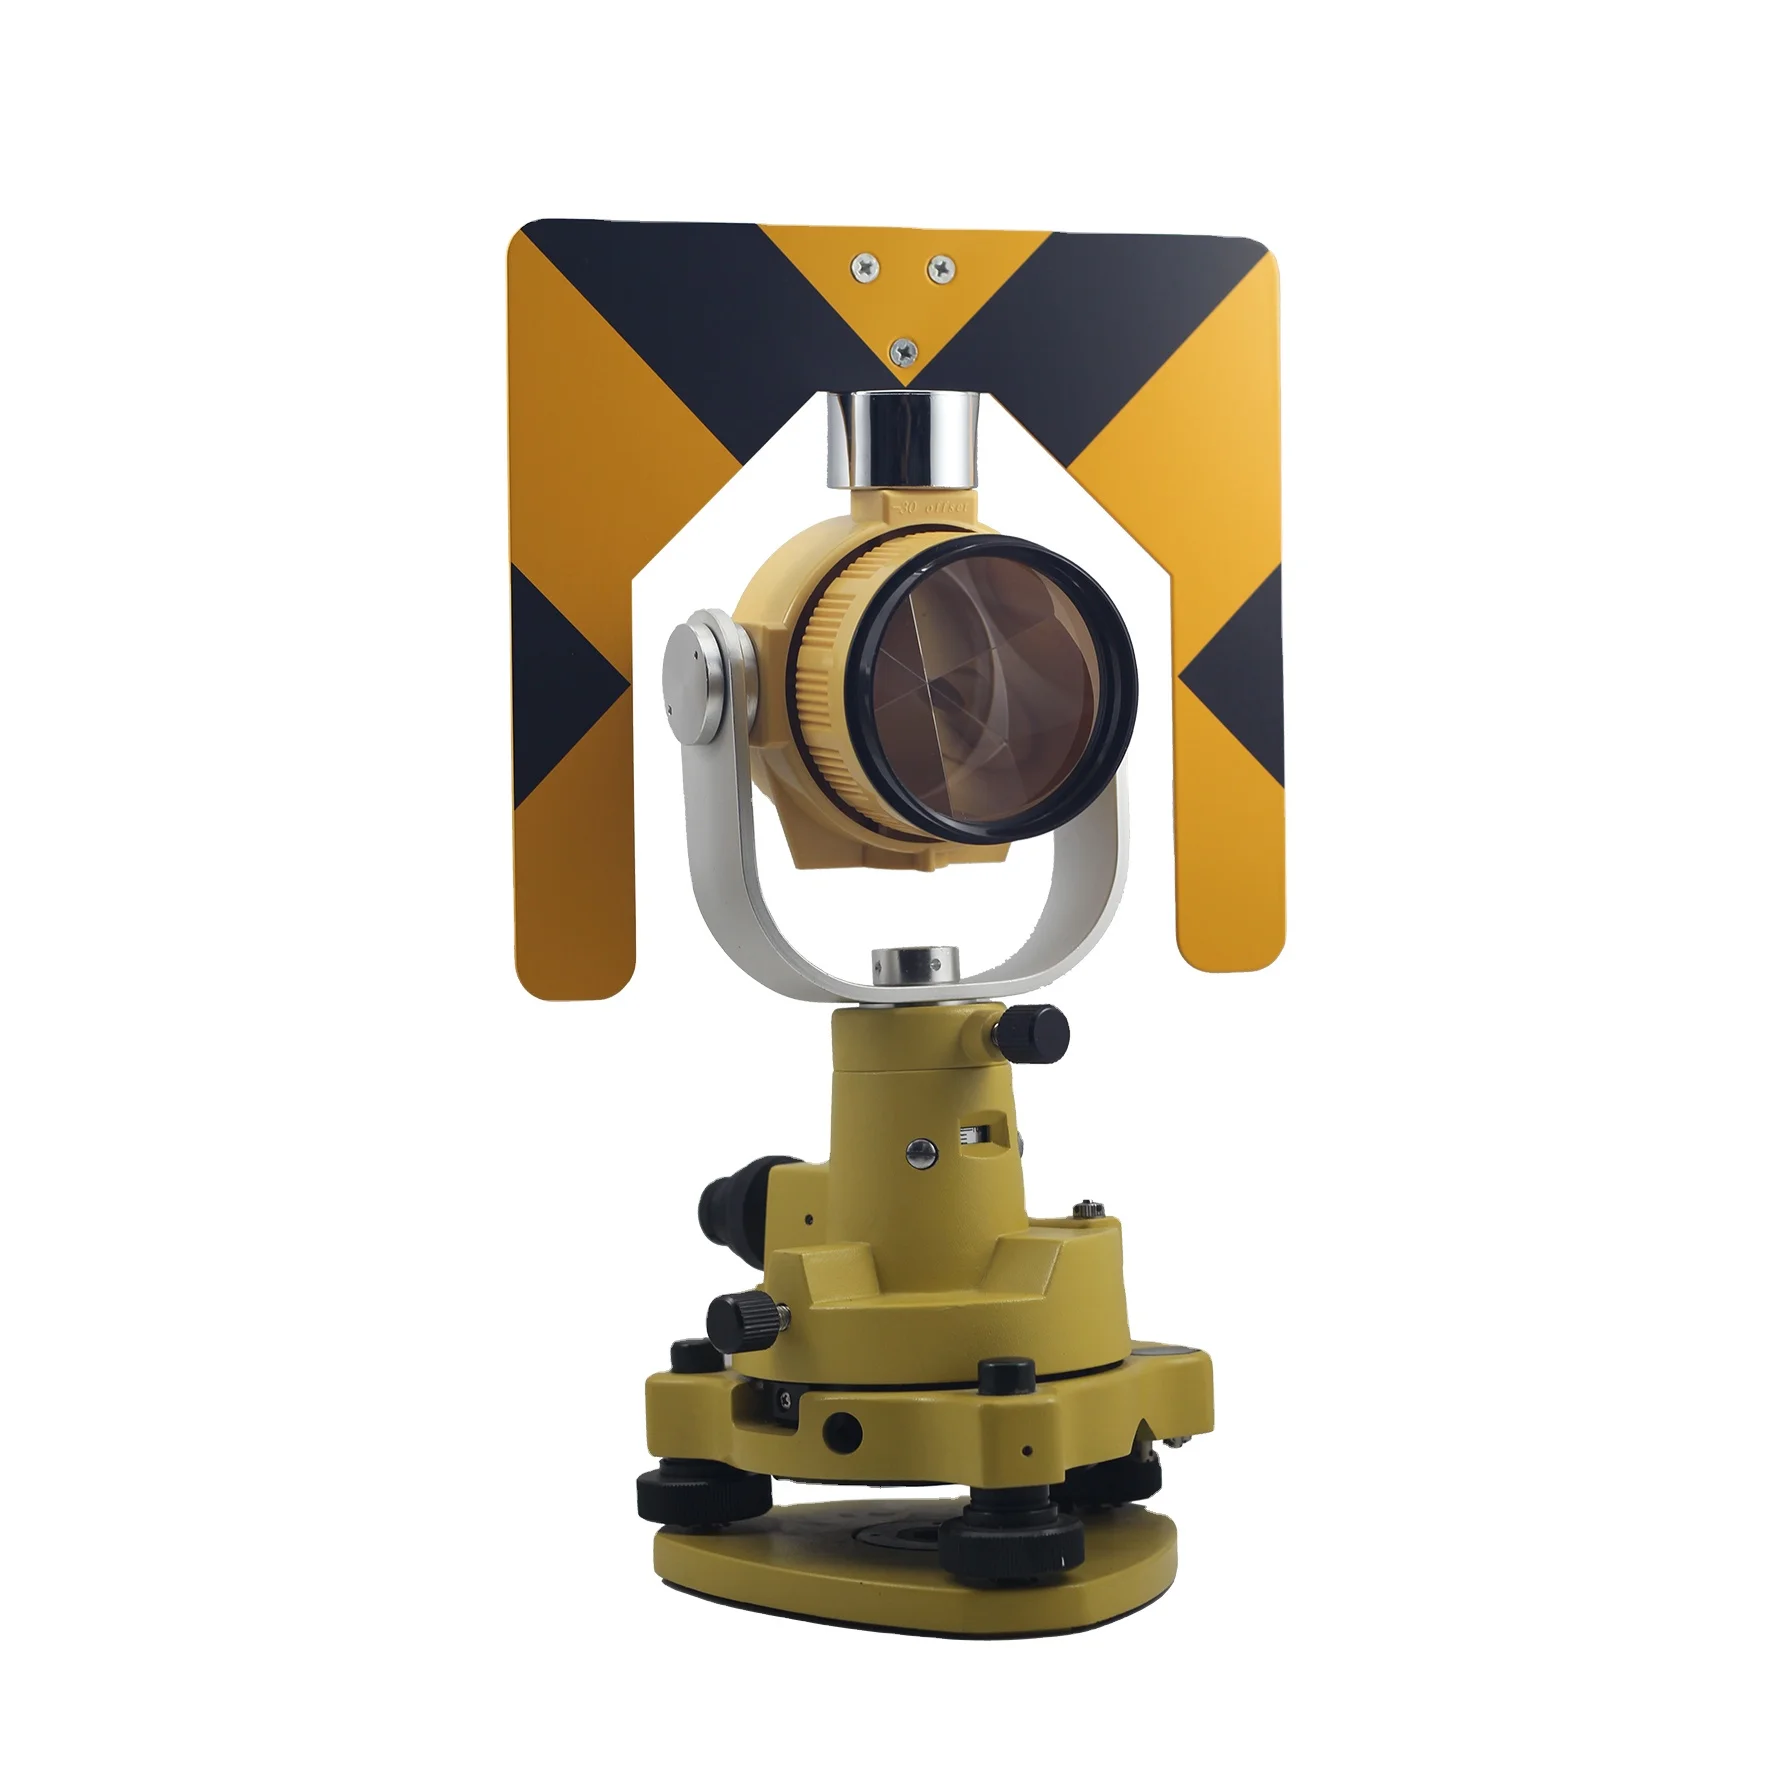 Prism Reflection System Surveying Prism Tds10 Used For Series Total  Stations Surveying Prism - Buy Surveying Prism,Prism Reflection System,Prism  For Series Total Stations Product on 